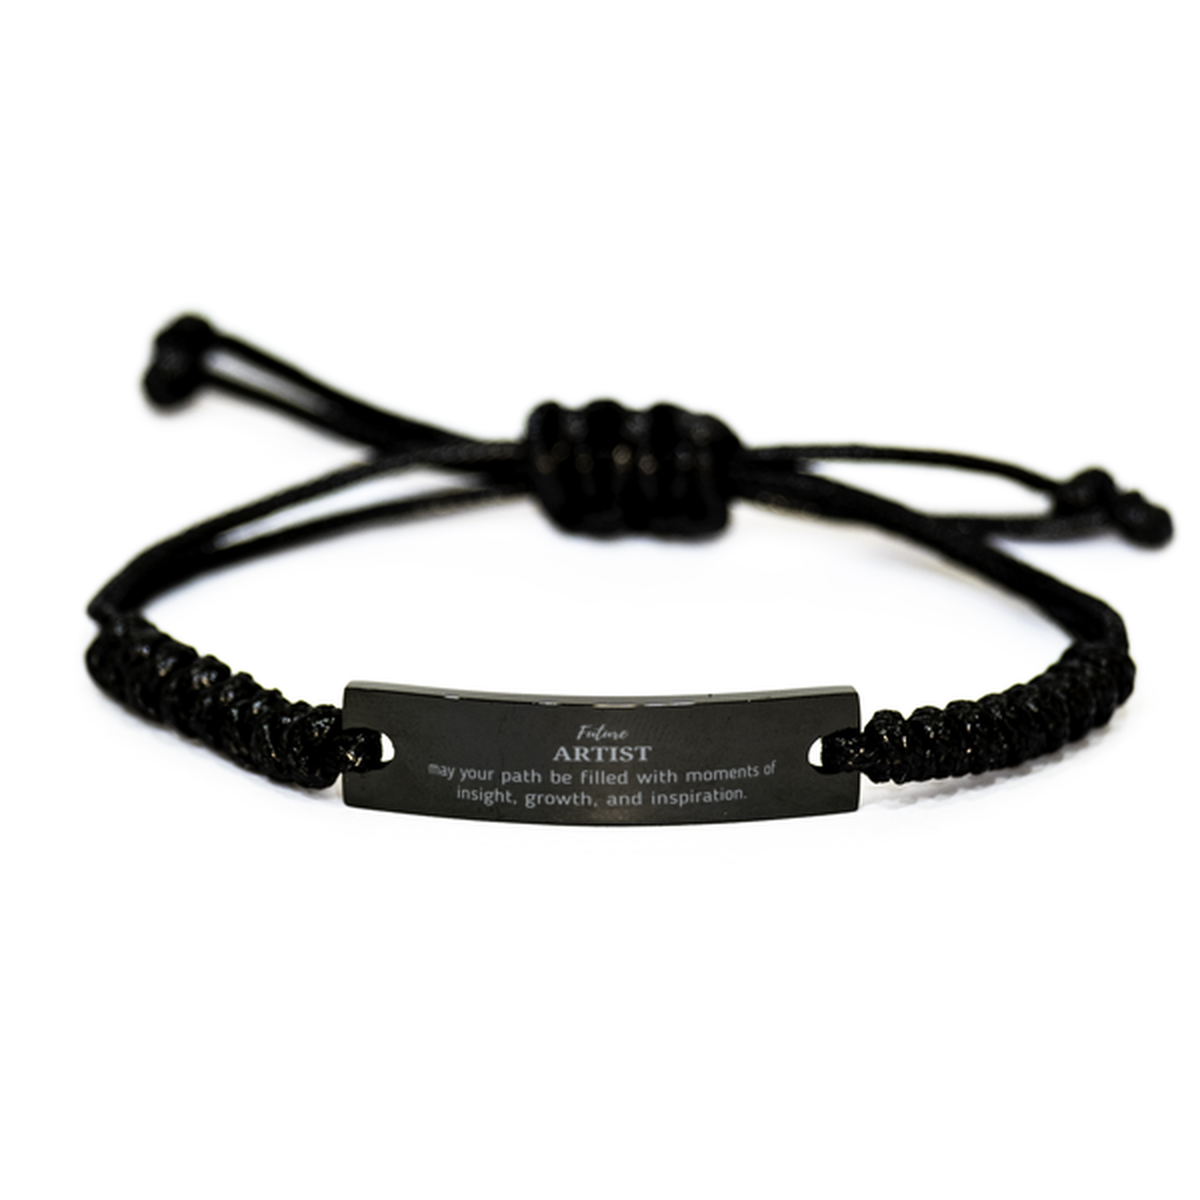 Future Artist Gifts, May your path be filled with moments of insight, Graduation Gifts for New Artist, Christmas Unique Black Rope Bracelet For Men, Women, Friends